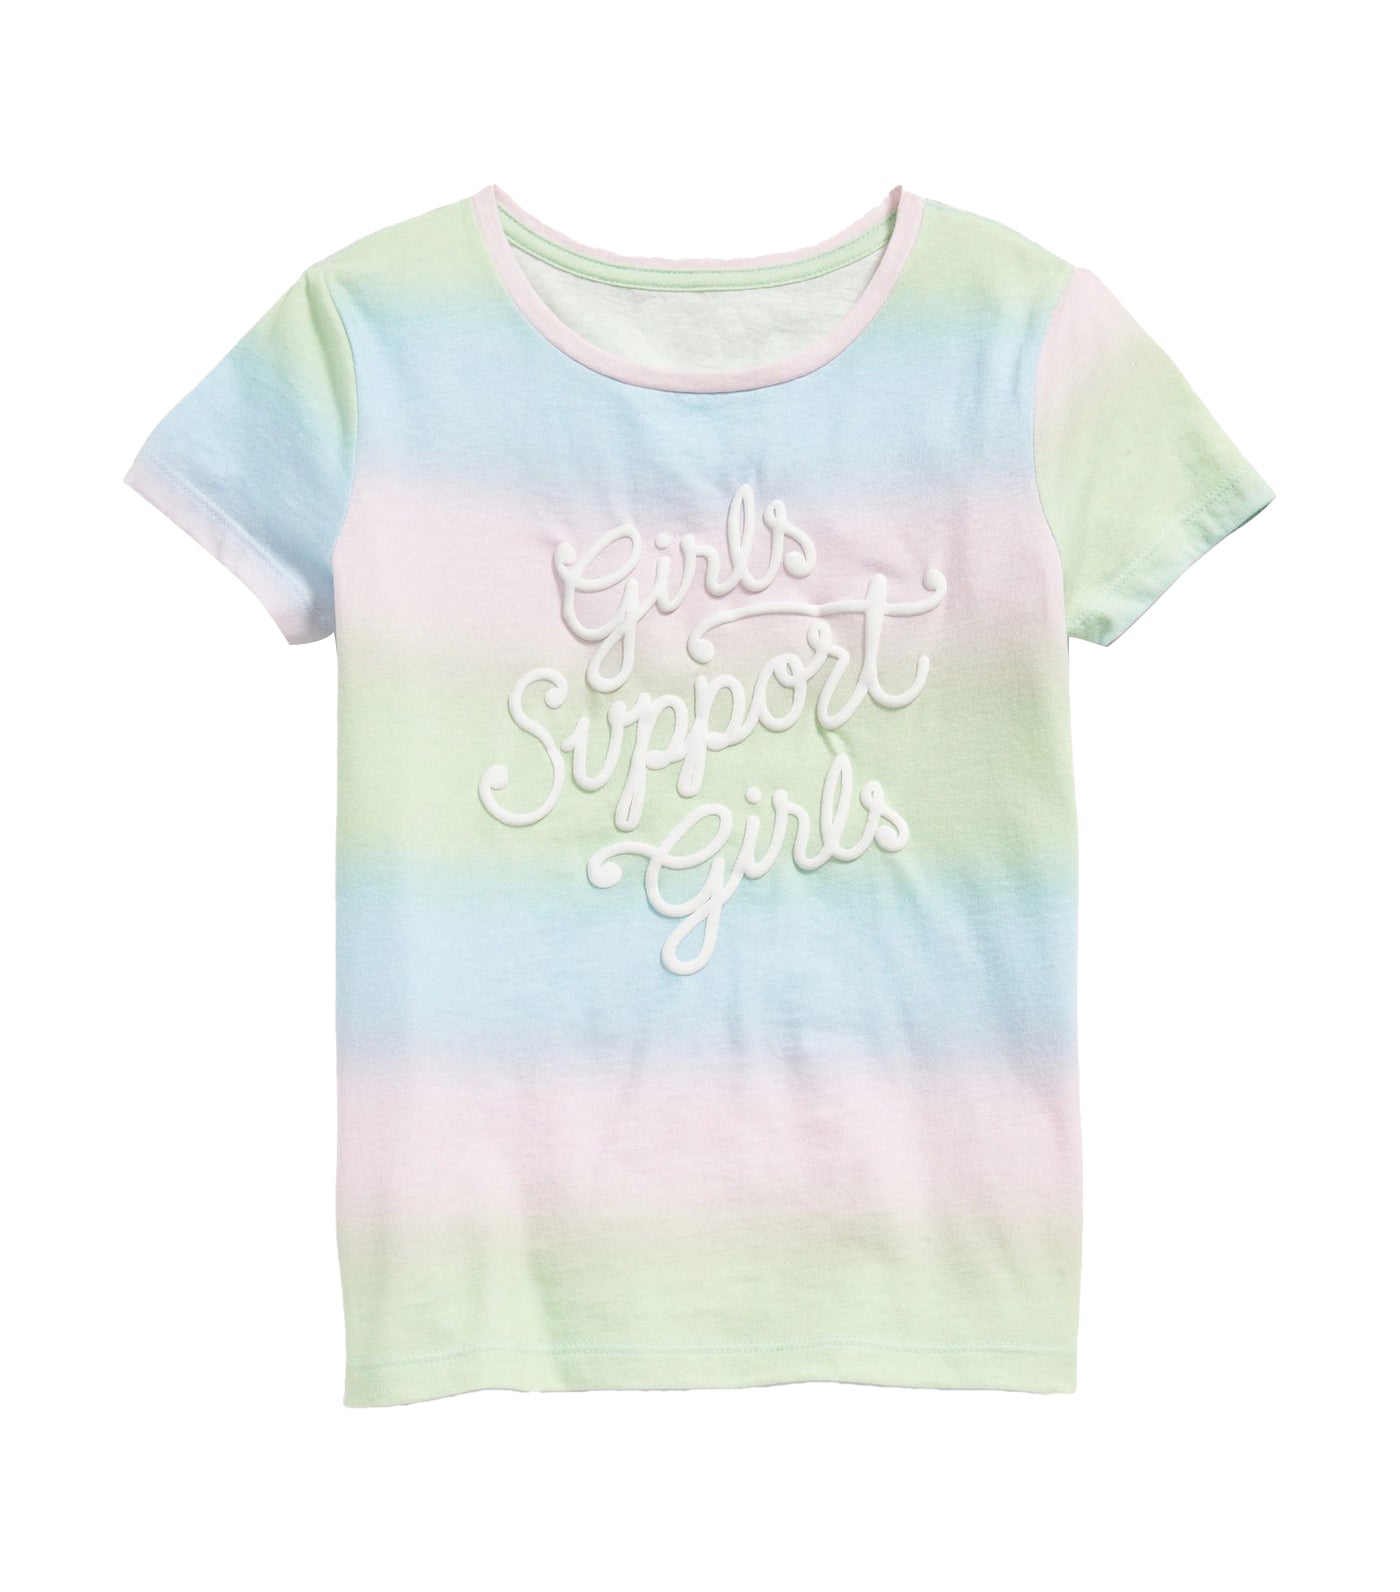 Short-Sleeve Graphic T-Shirt for Girls Blue Ombre